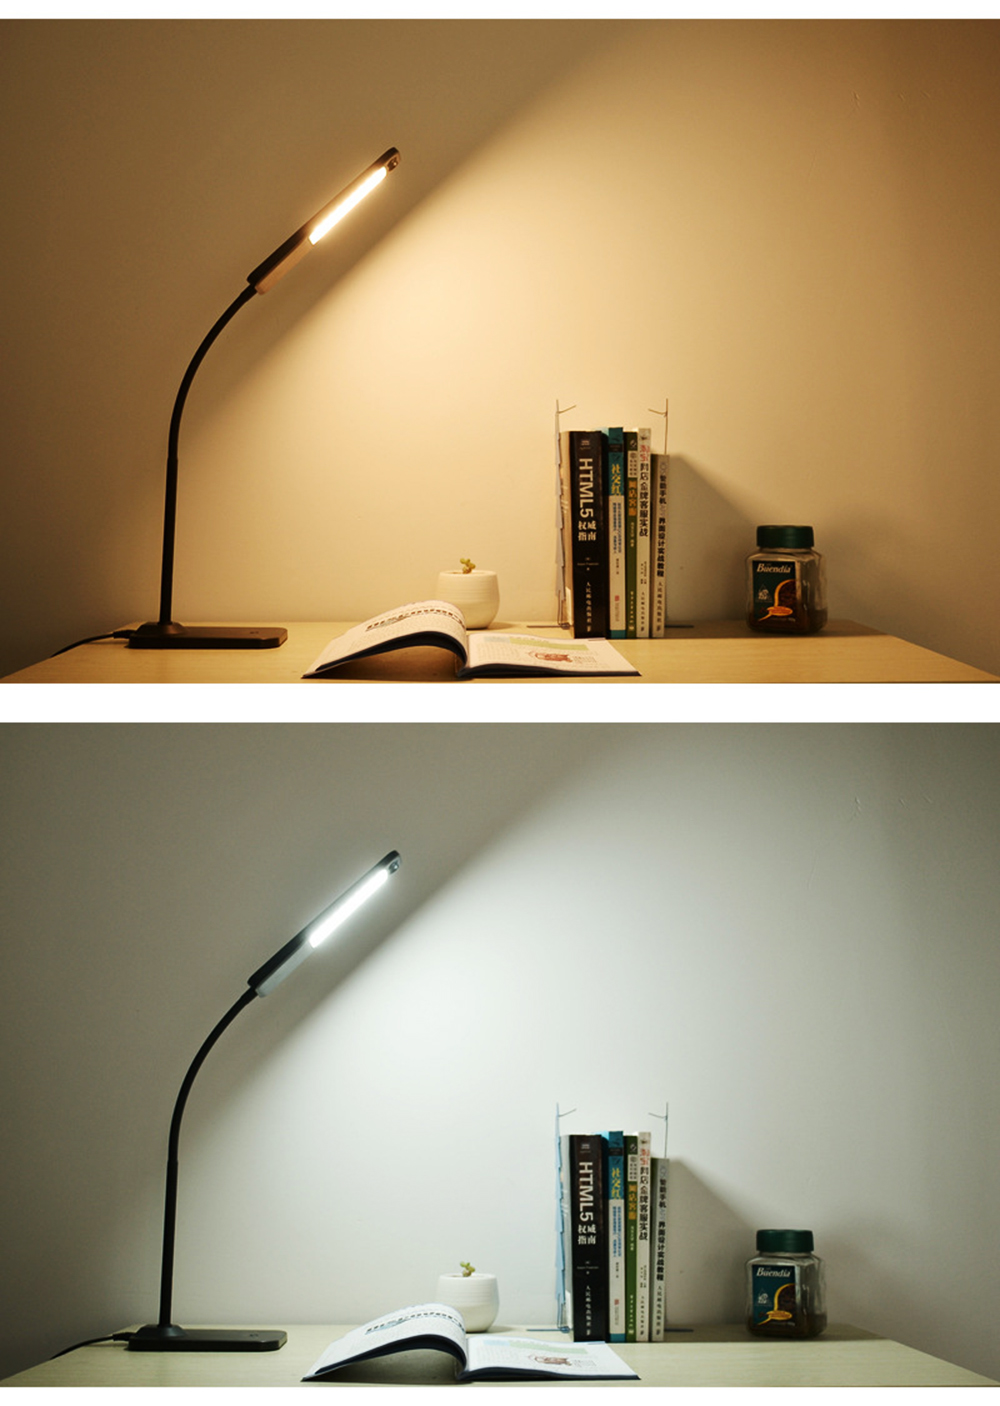 BRELONG  LED Table Lamp Dimming Study Reading Lamp USB Output Charging